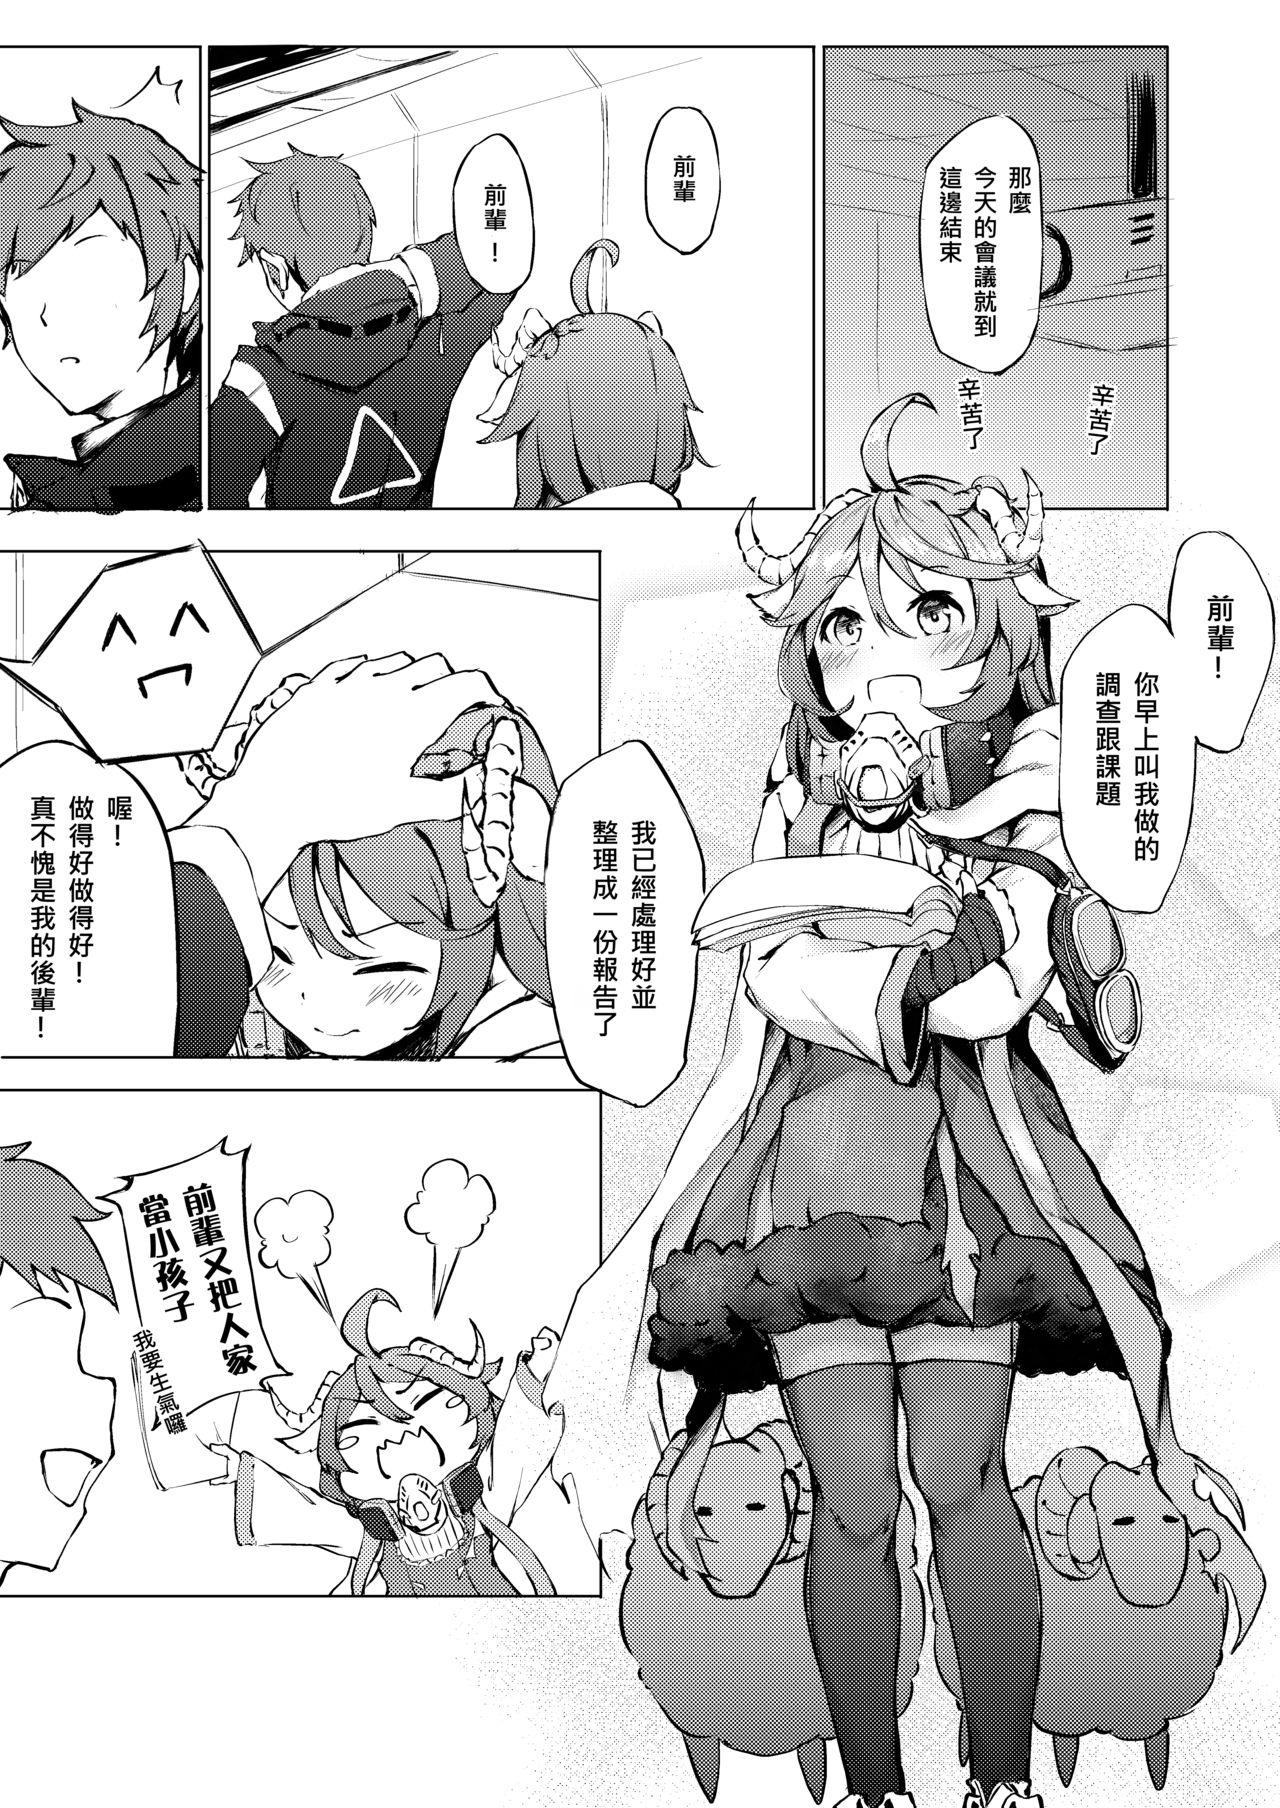 Uniform 不存在的聲音 | The Nonexistence Voice - Arknights Gay Rimming - Page 5